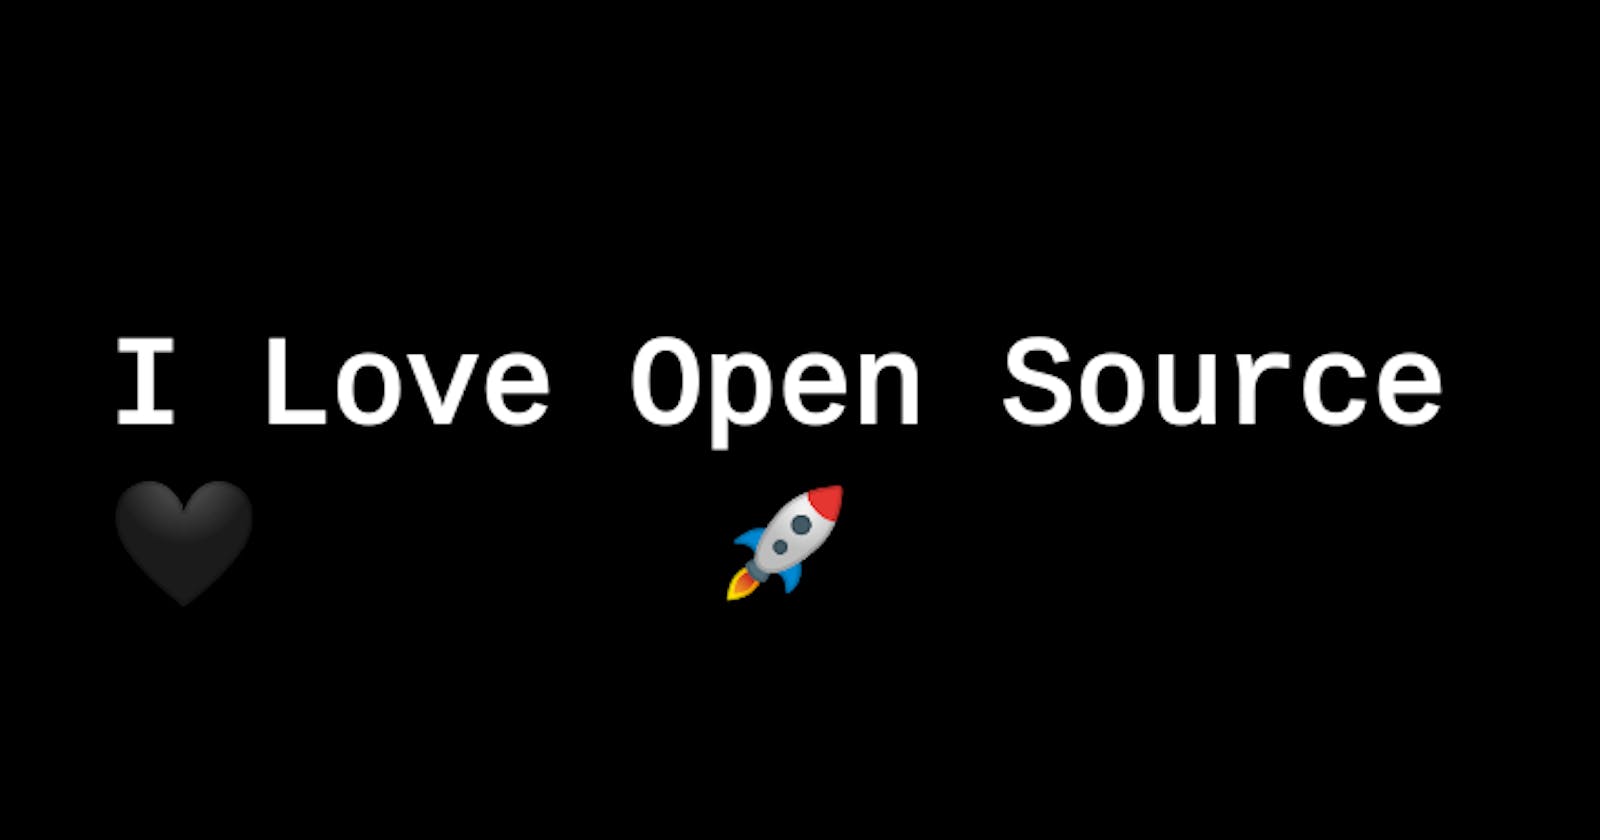 My experience at open source challenge 2021